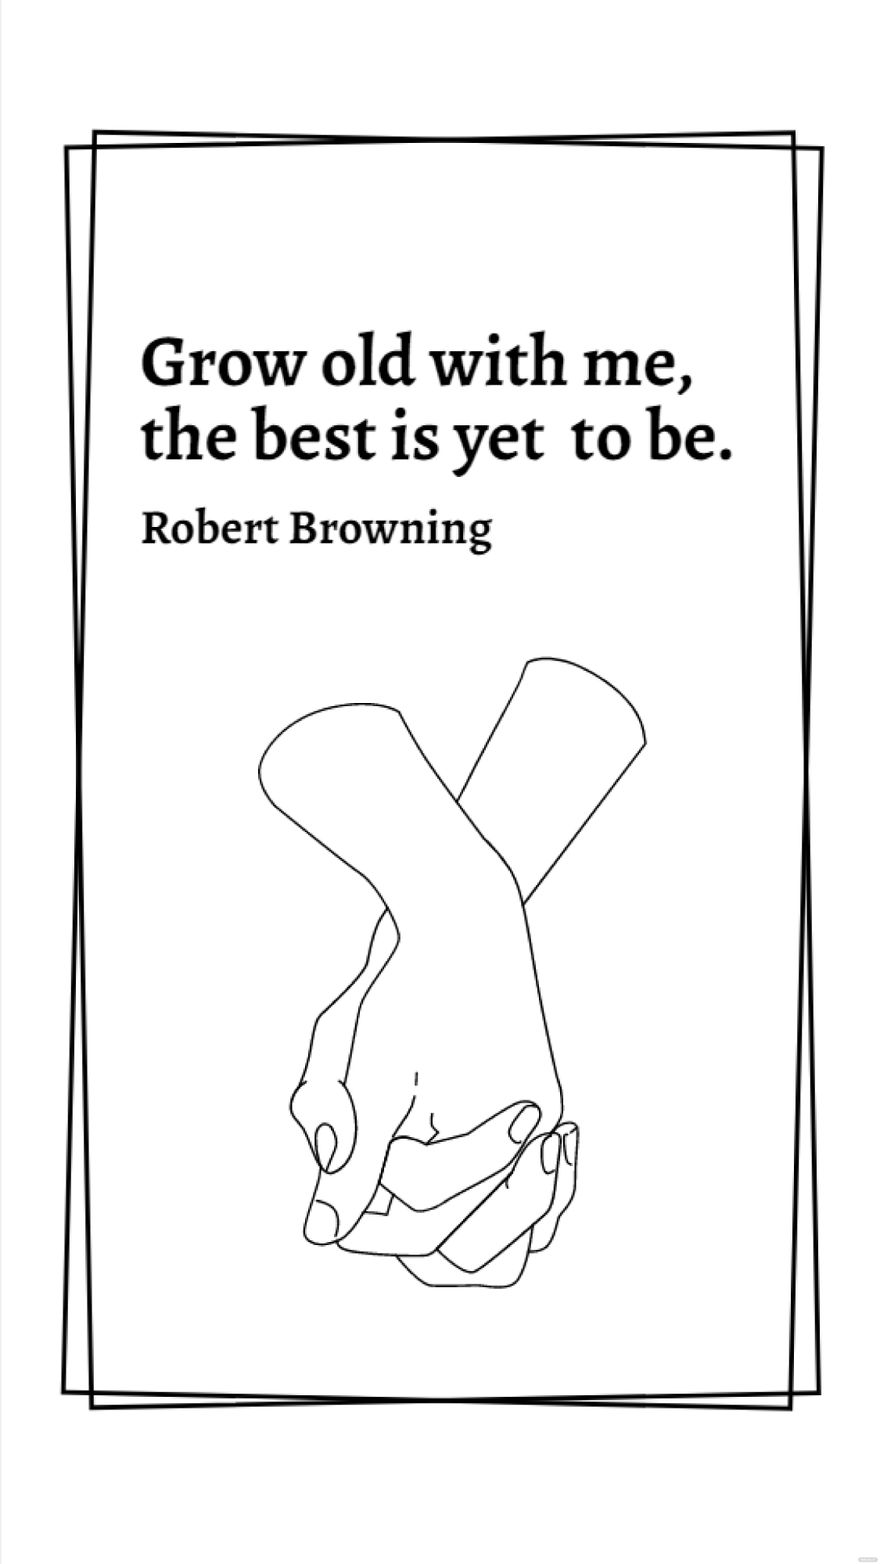 Robert Browning - Grow old with me, the best is yet to be. in JPG